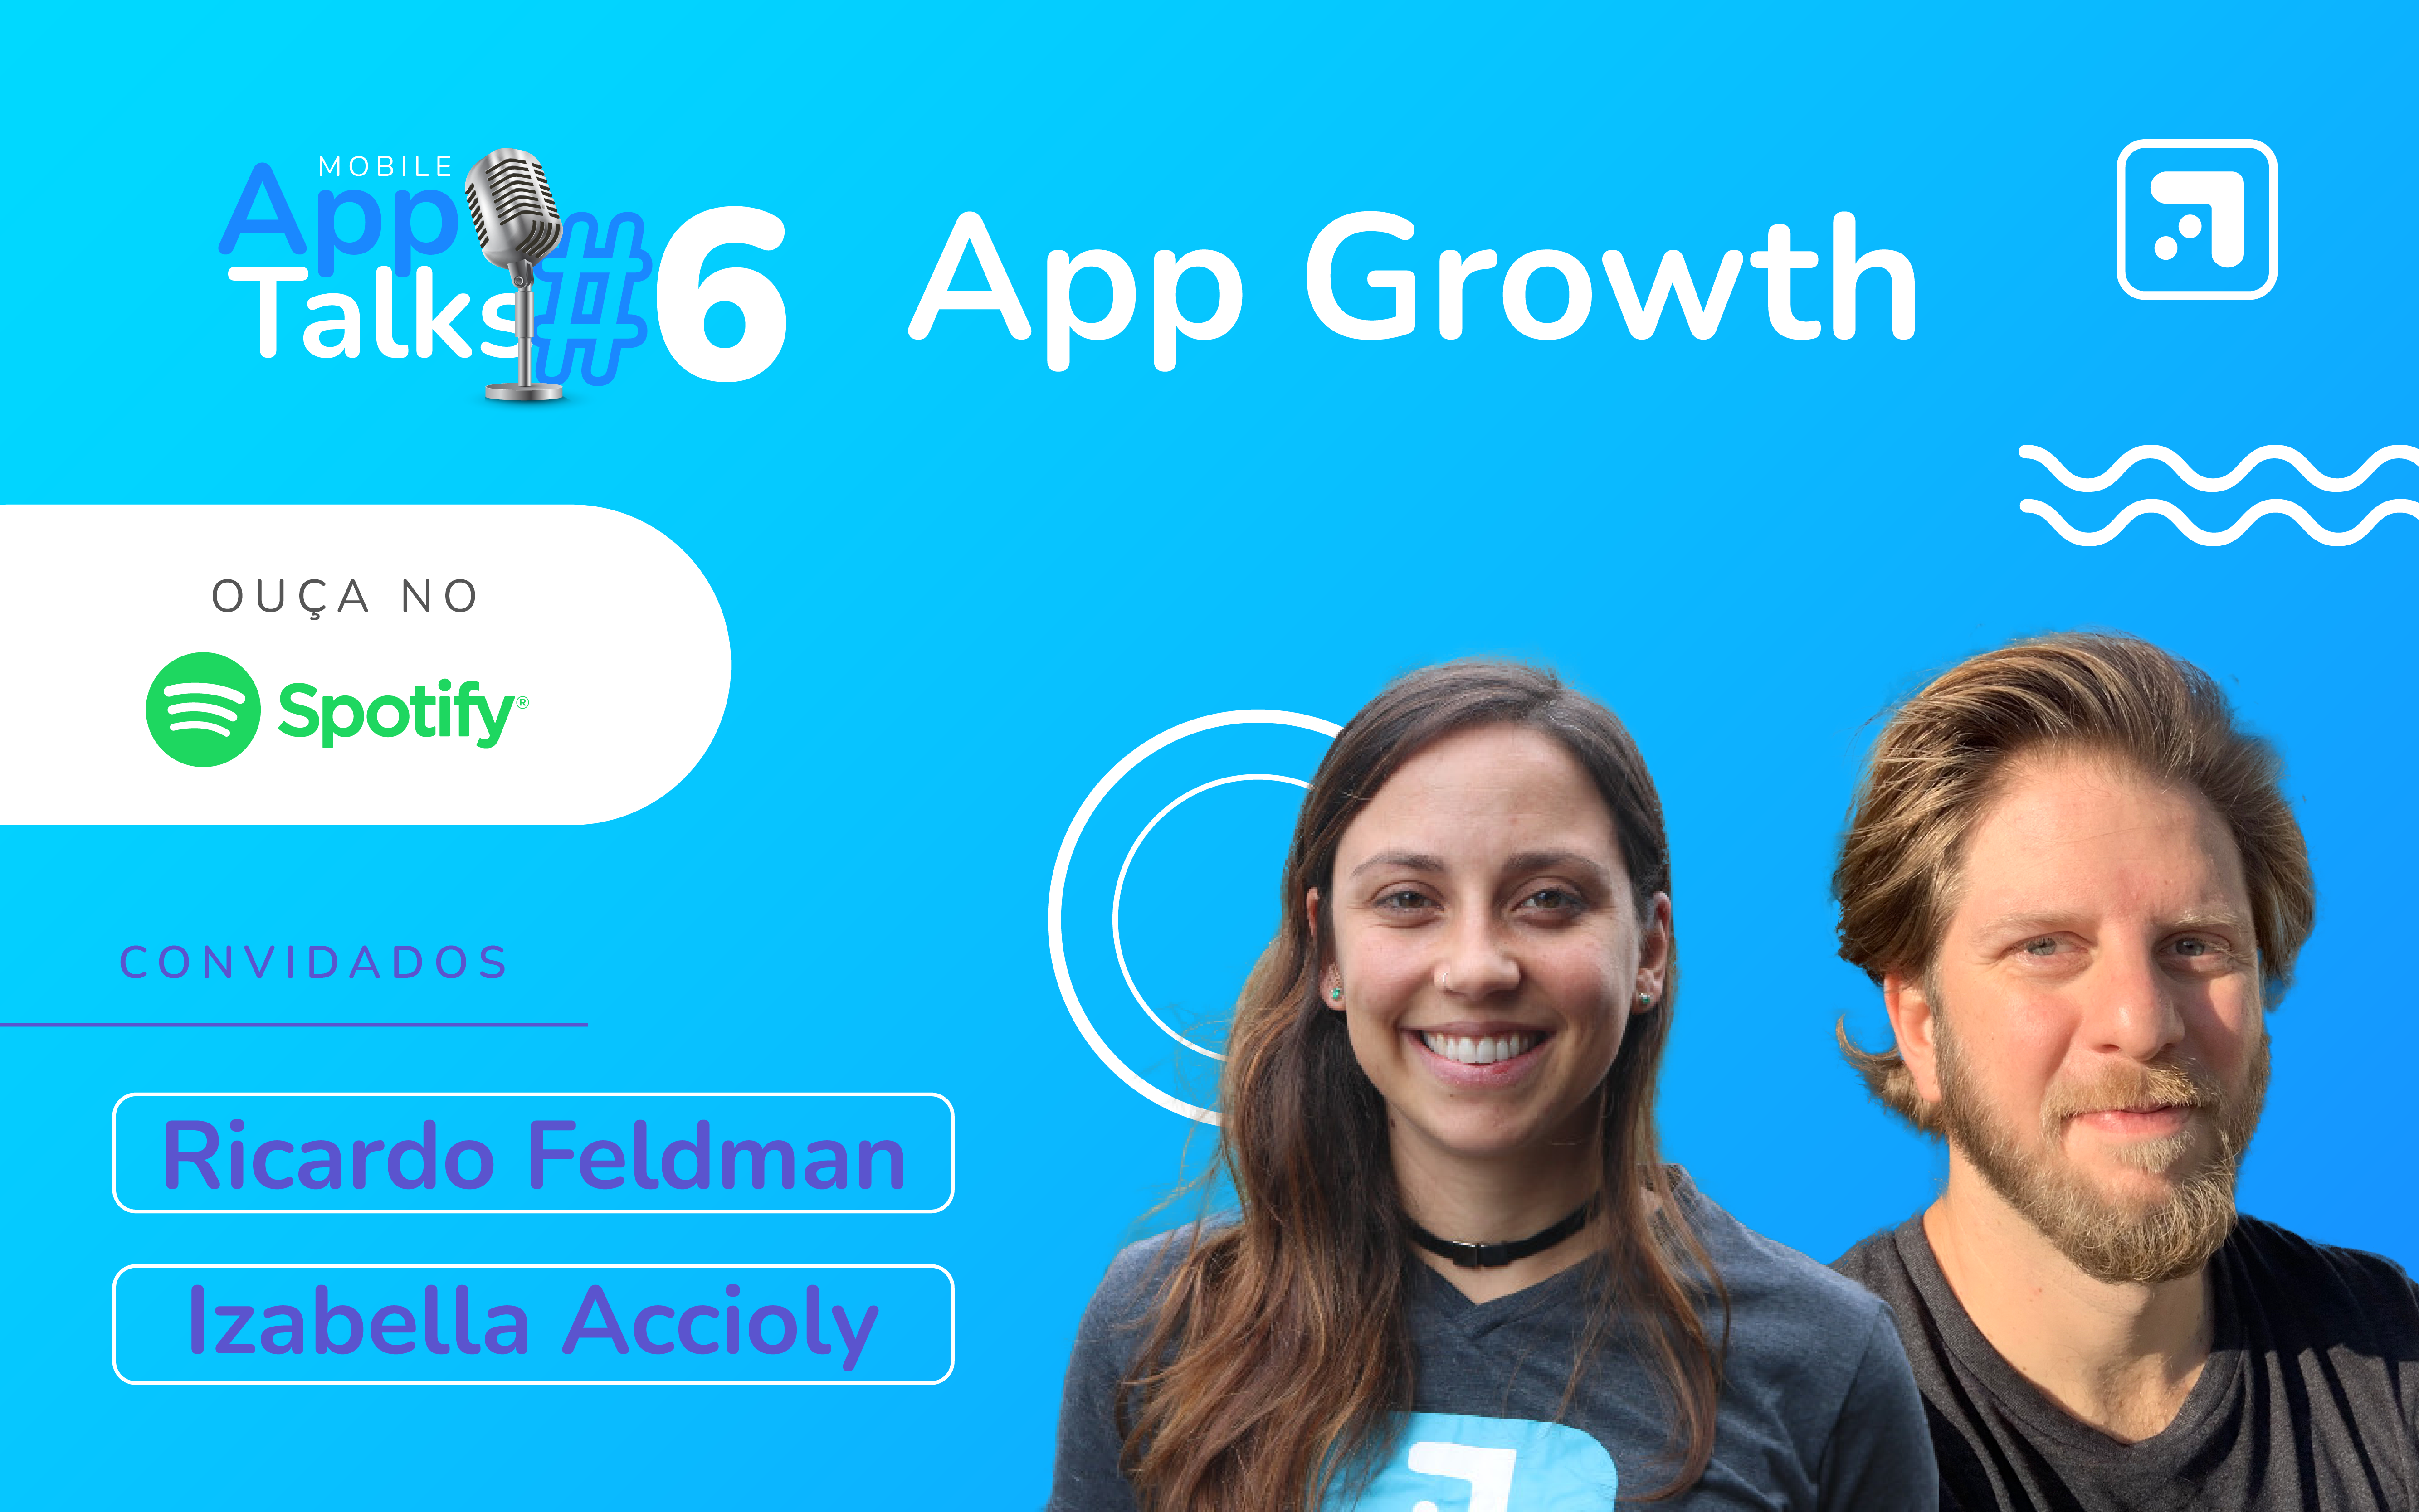 mobile app growth no spotify